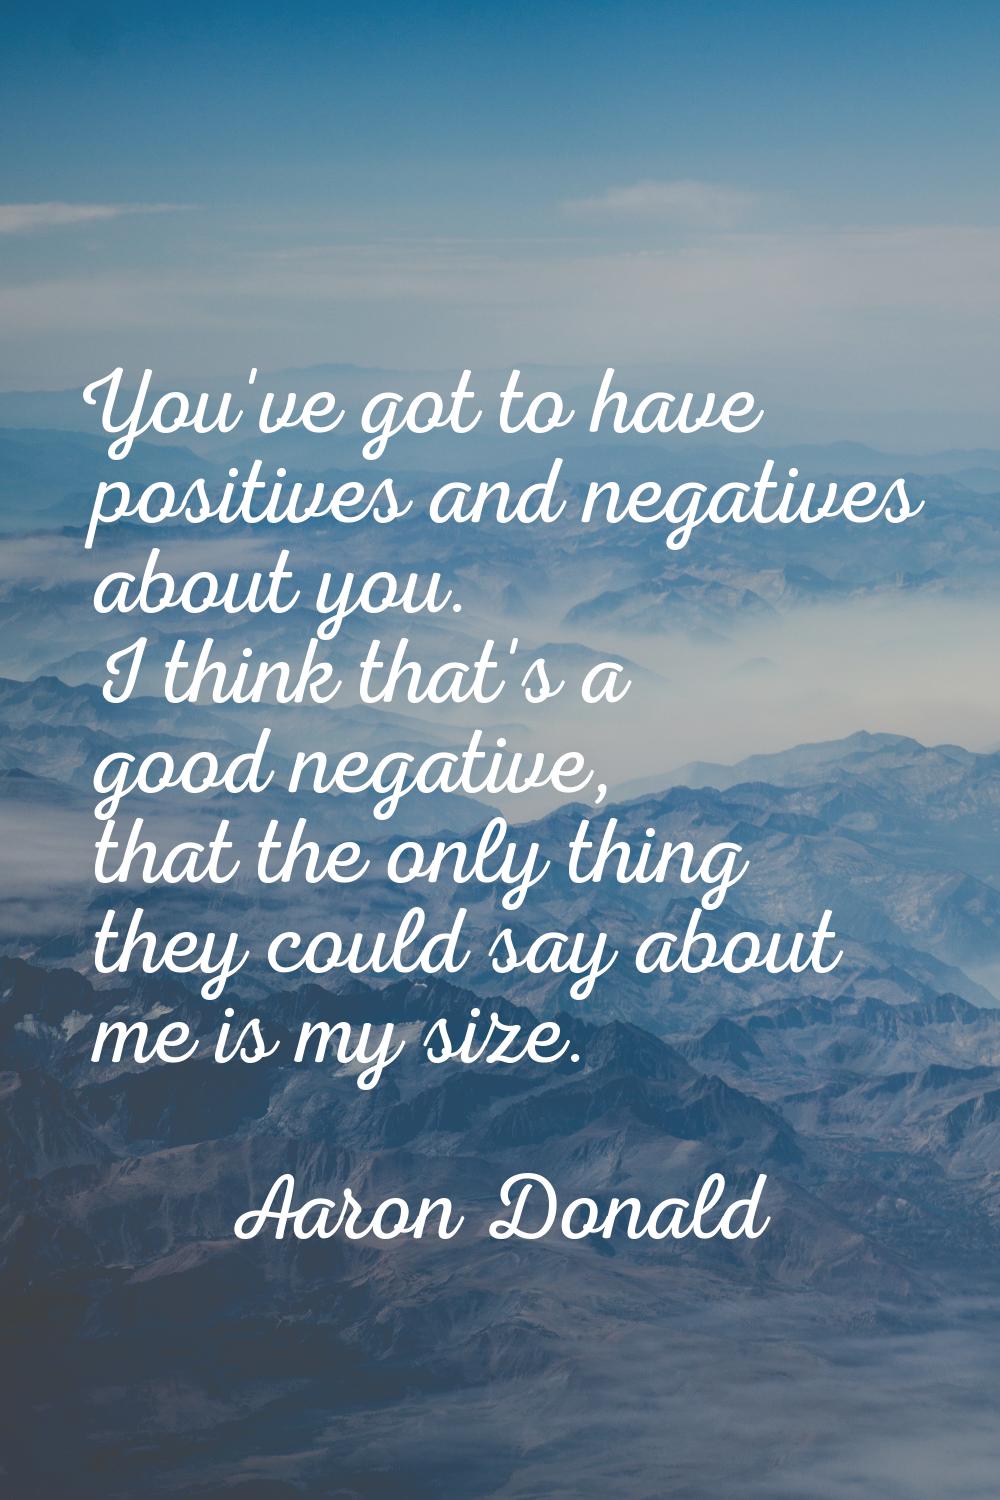 You've got to have positives and negatives about you. I think that's a good negative, that the only